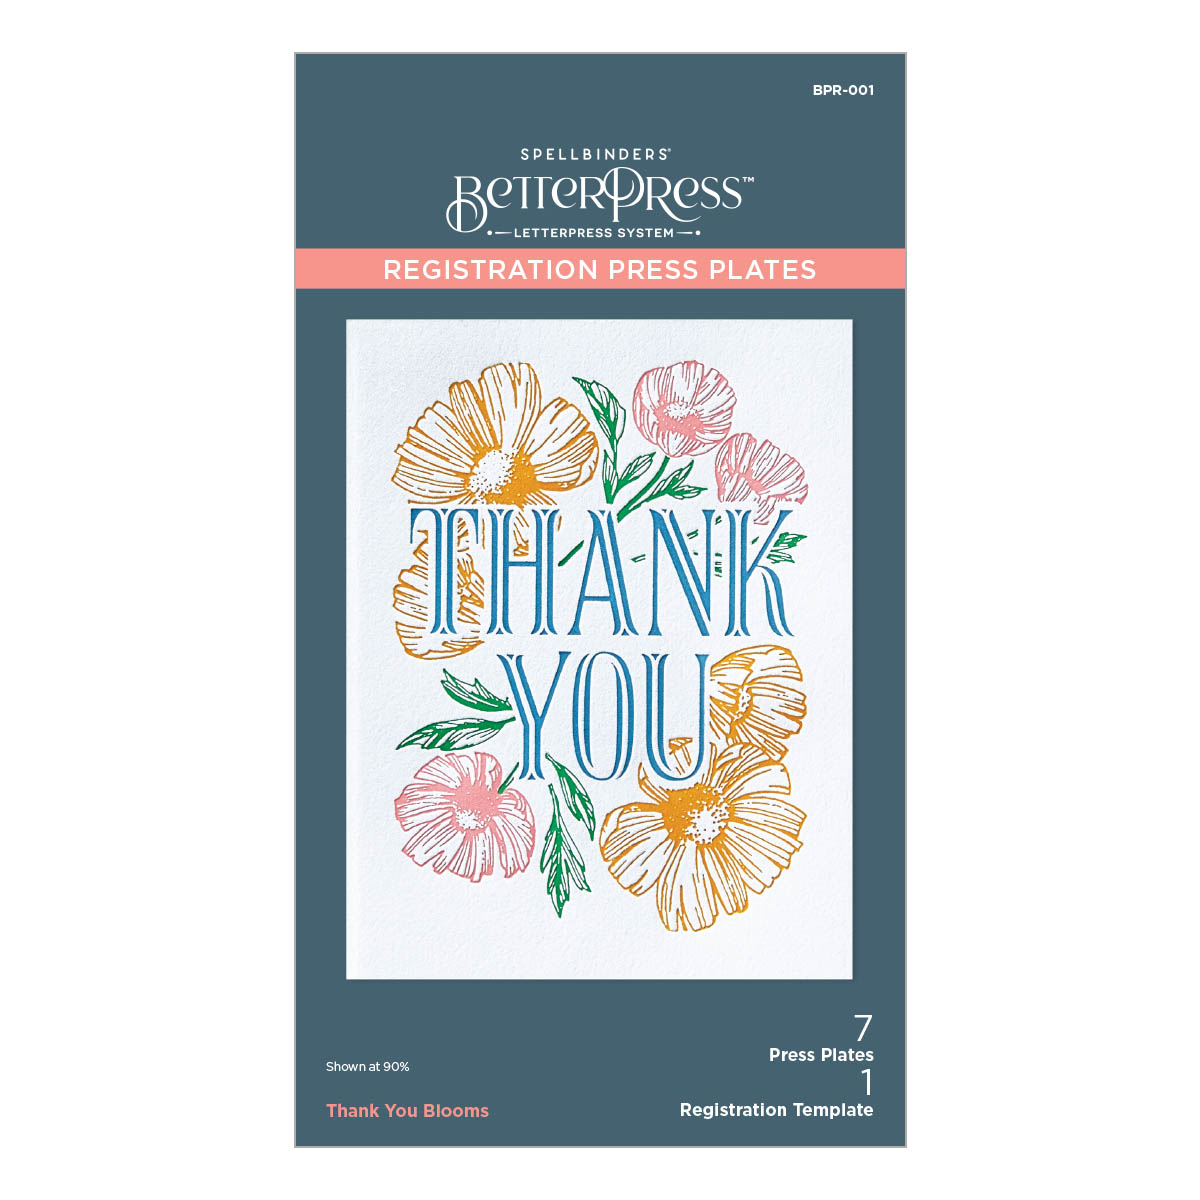 Spellbinders Thank You Blooms Registration Press Plates From the Betterpress Place & Press Registration Collection